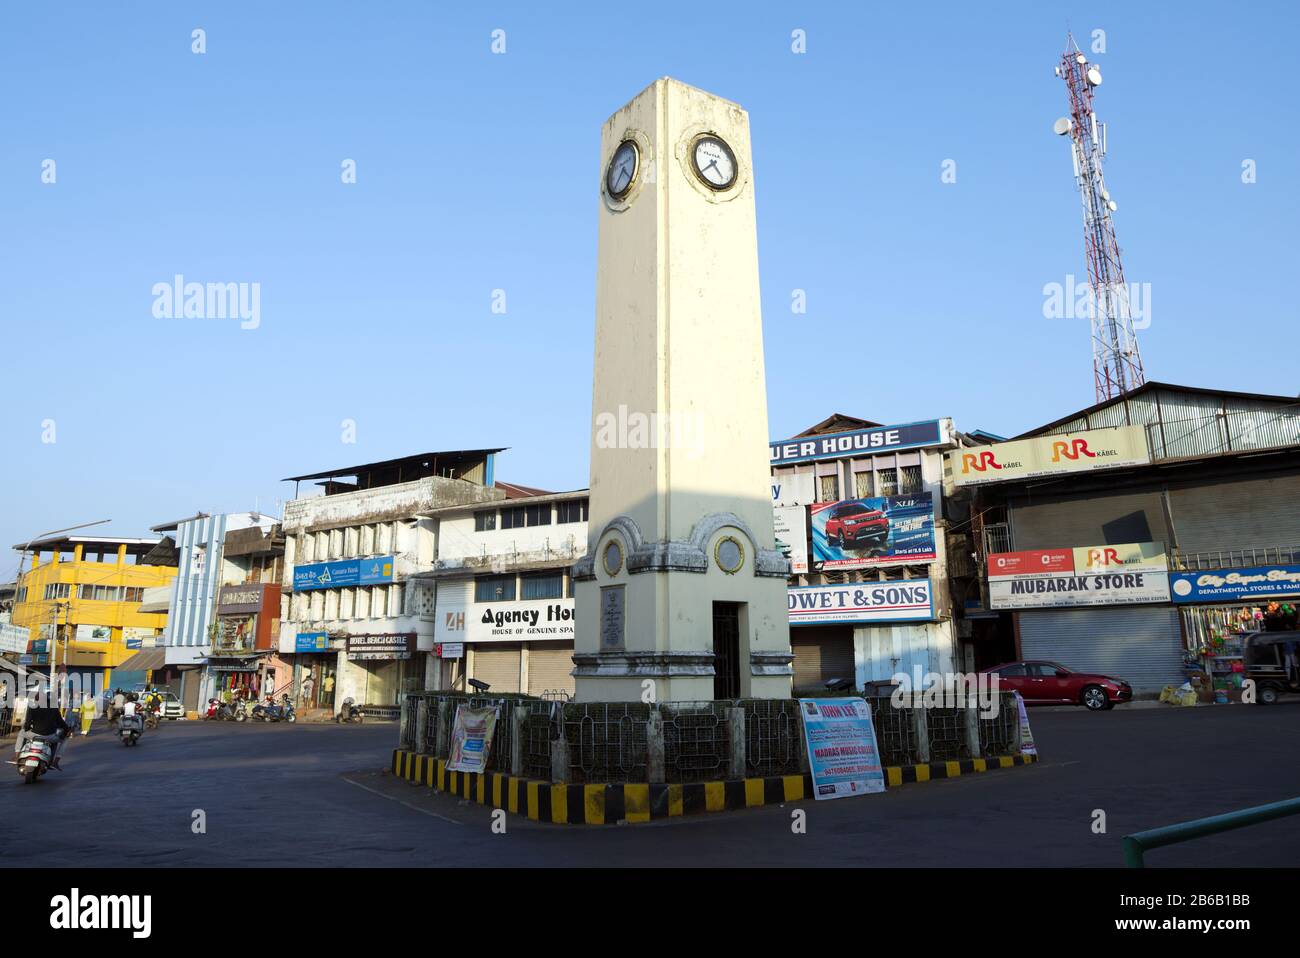 PORT BLAIR, INDIA - MARCH 1, 2020: Clock Tower at Port Blair in India. Clock Tower is a war memorial dedicated to the memory of victory and of the sol Stock Photo